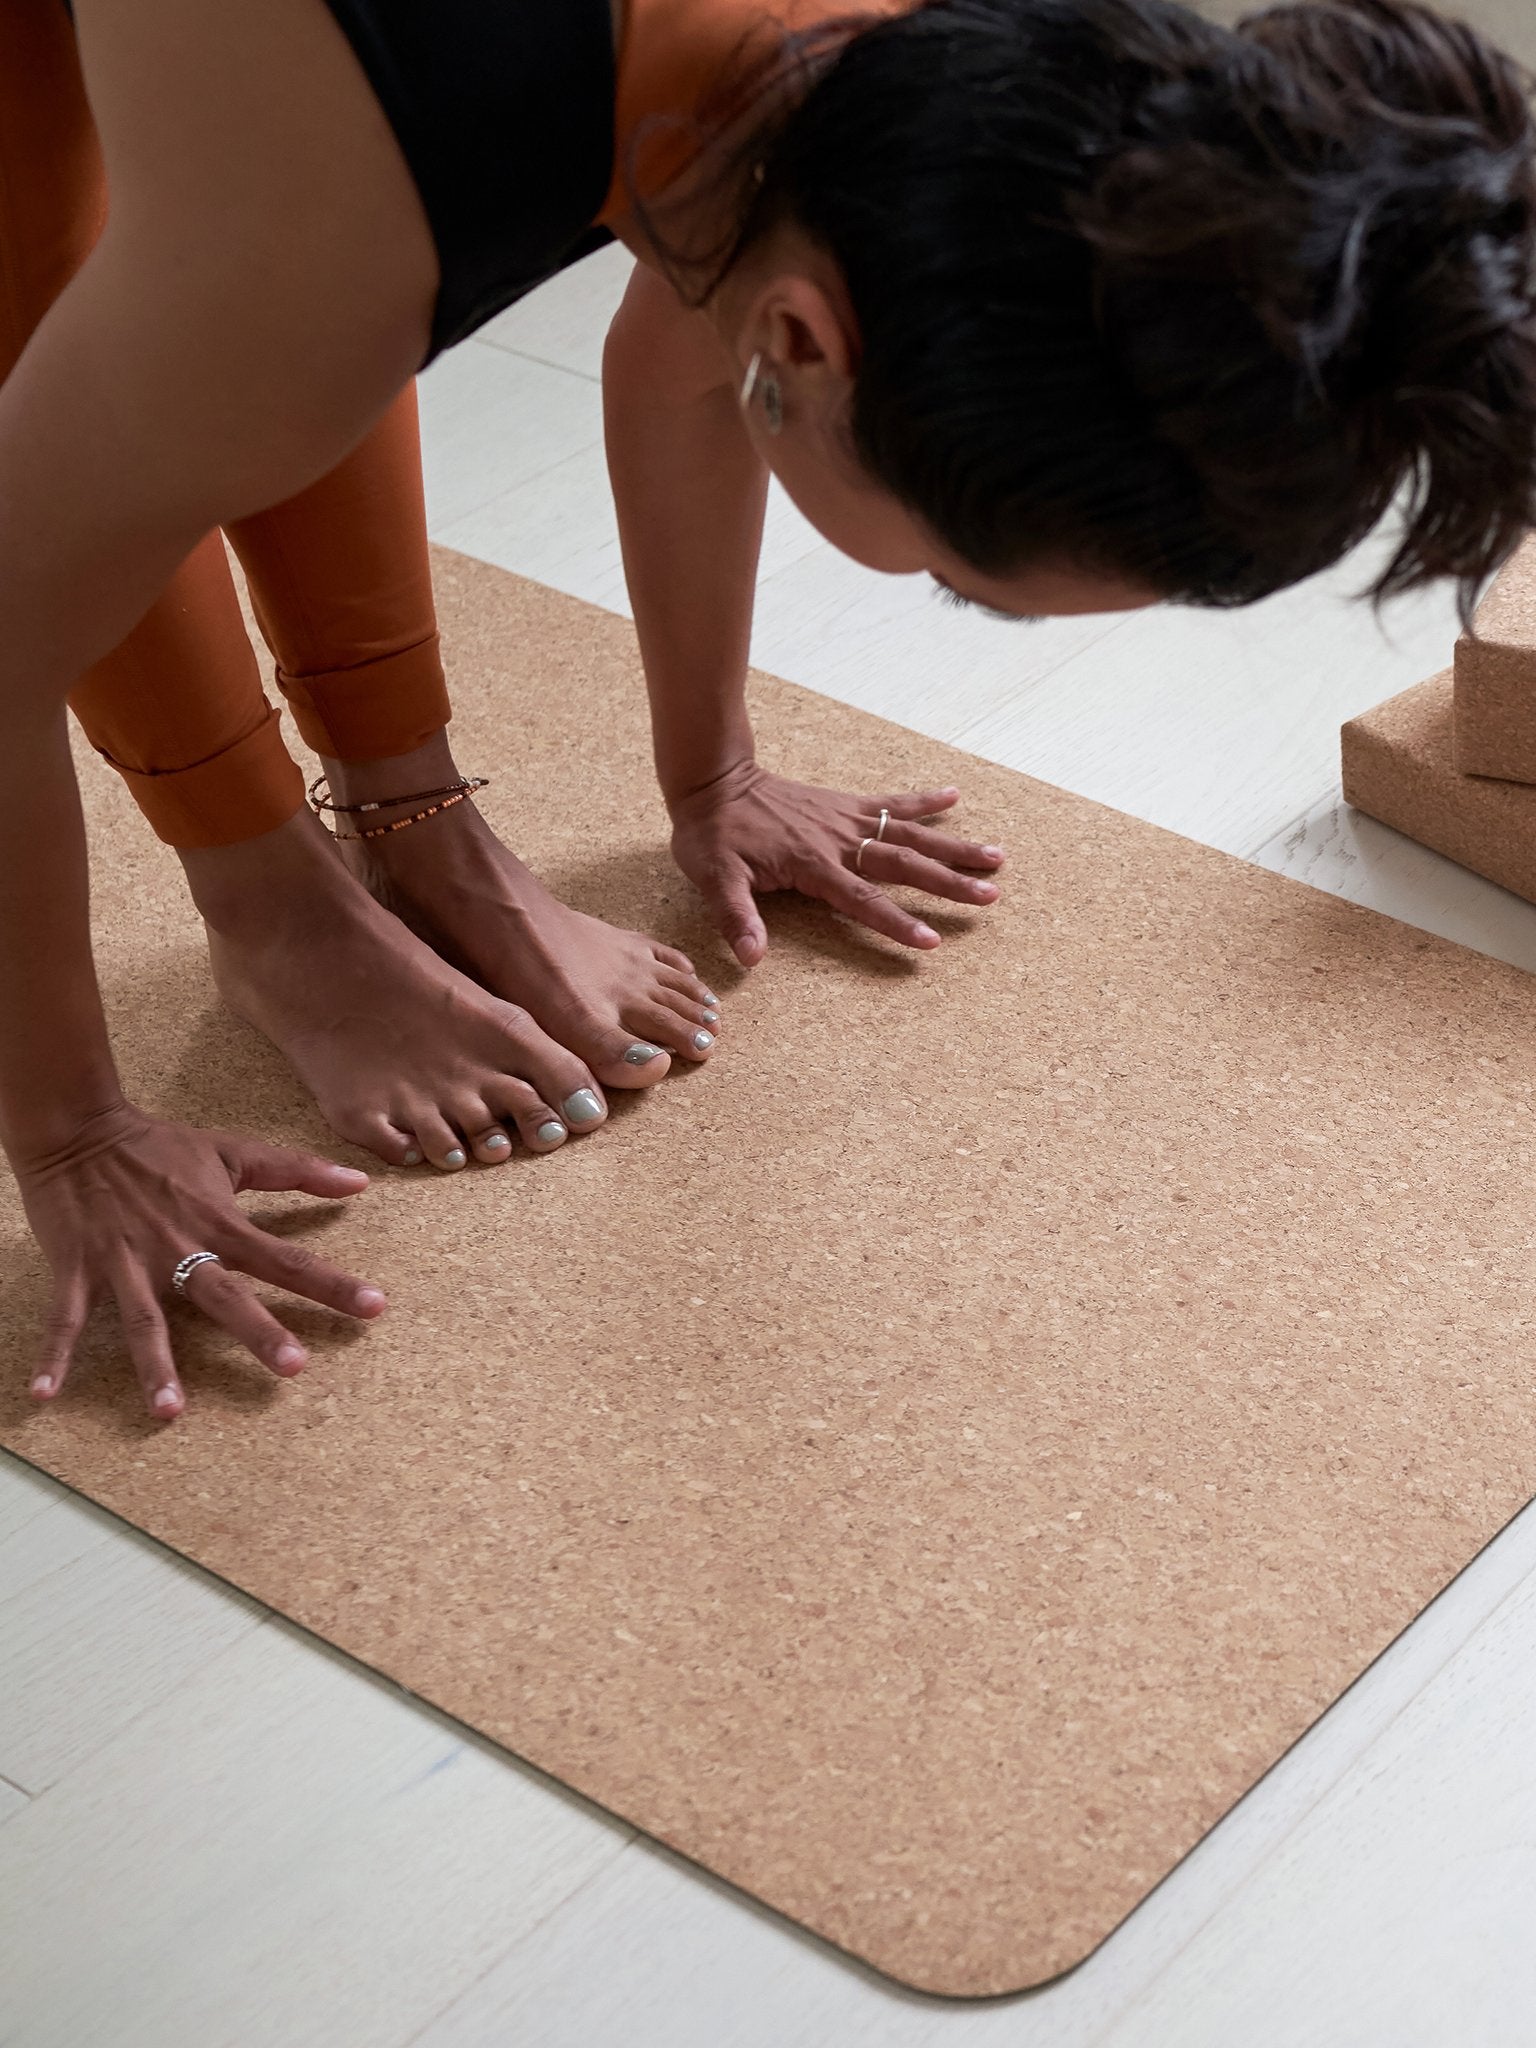 Woman practicing yoga on a textured cork yoga mat, eco-friendly non-slip surface, shot from the side with focus on hands and feet positioning, neutral tones, indoor exercise equipment